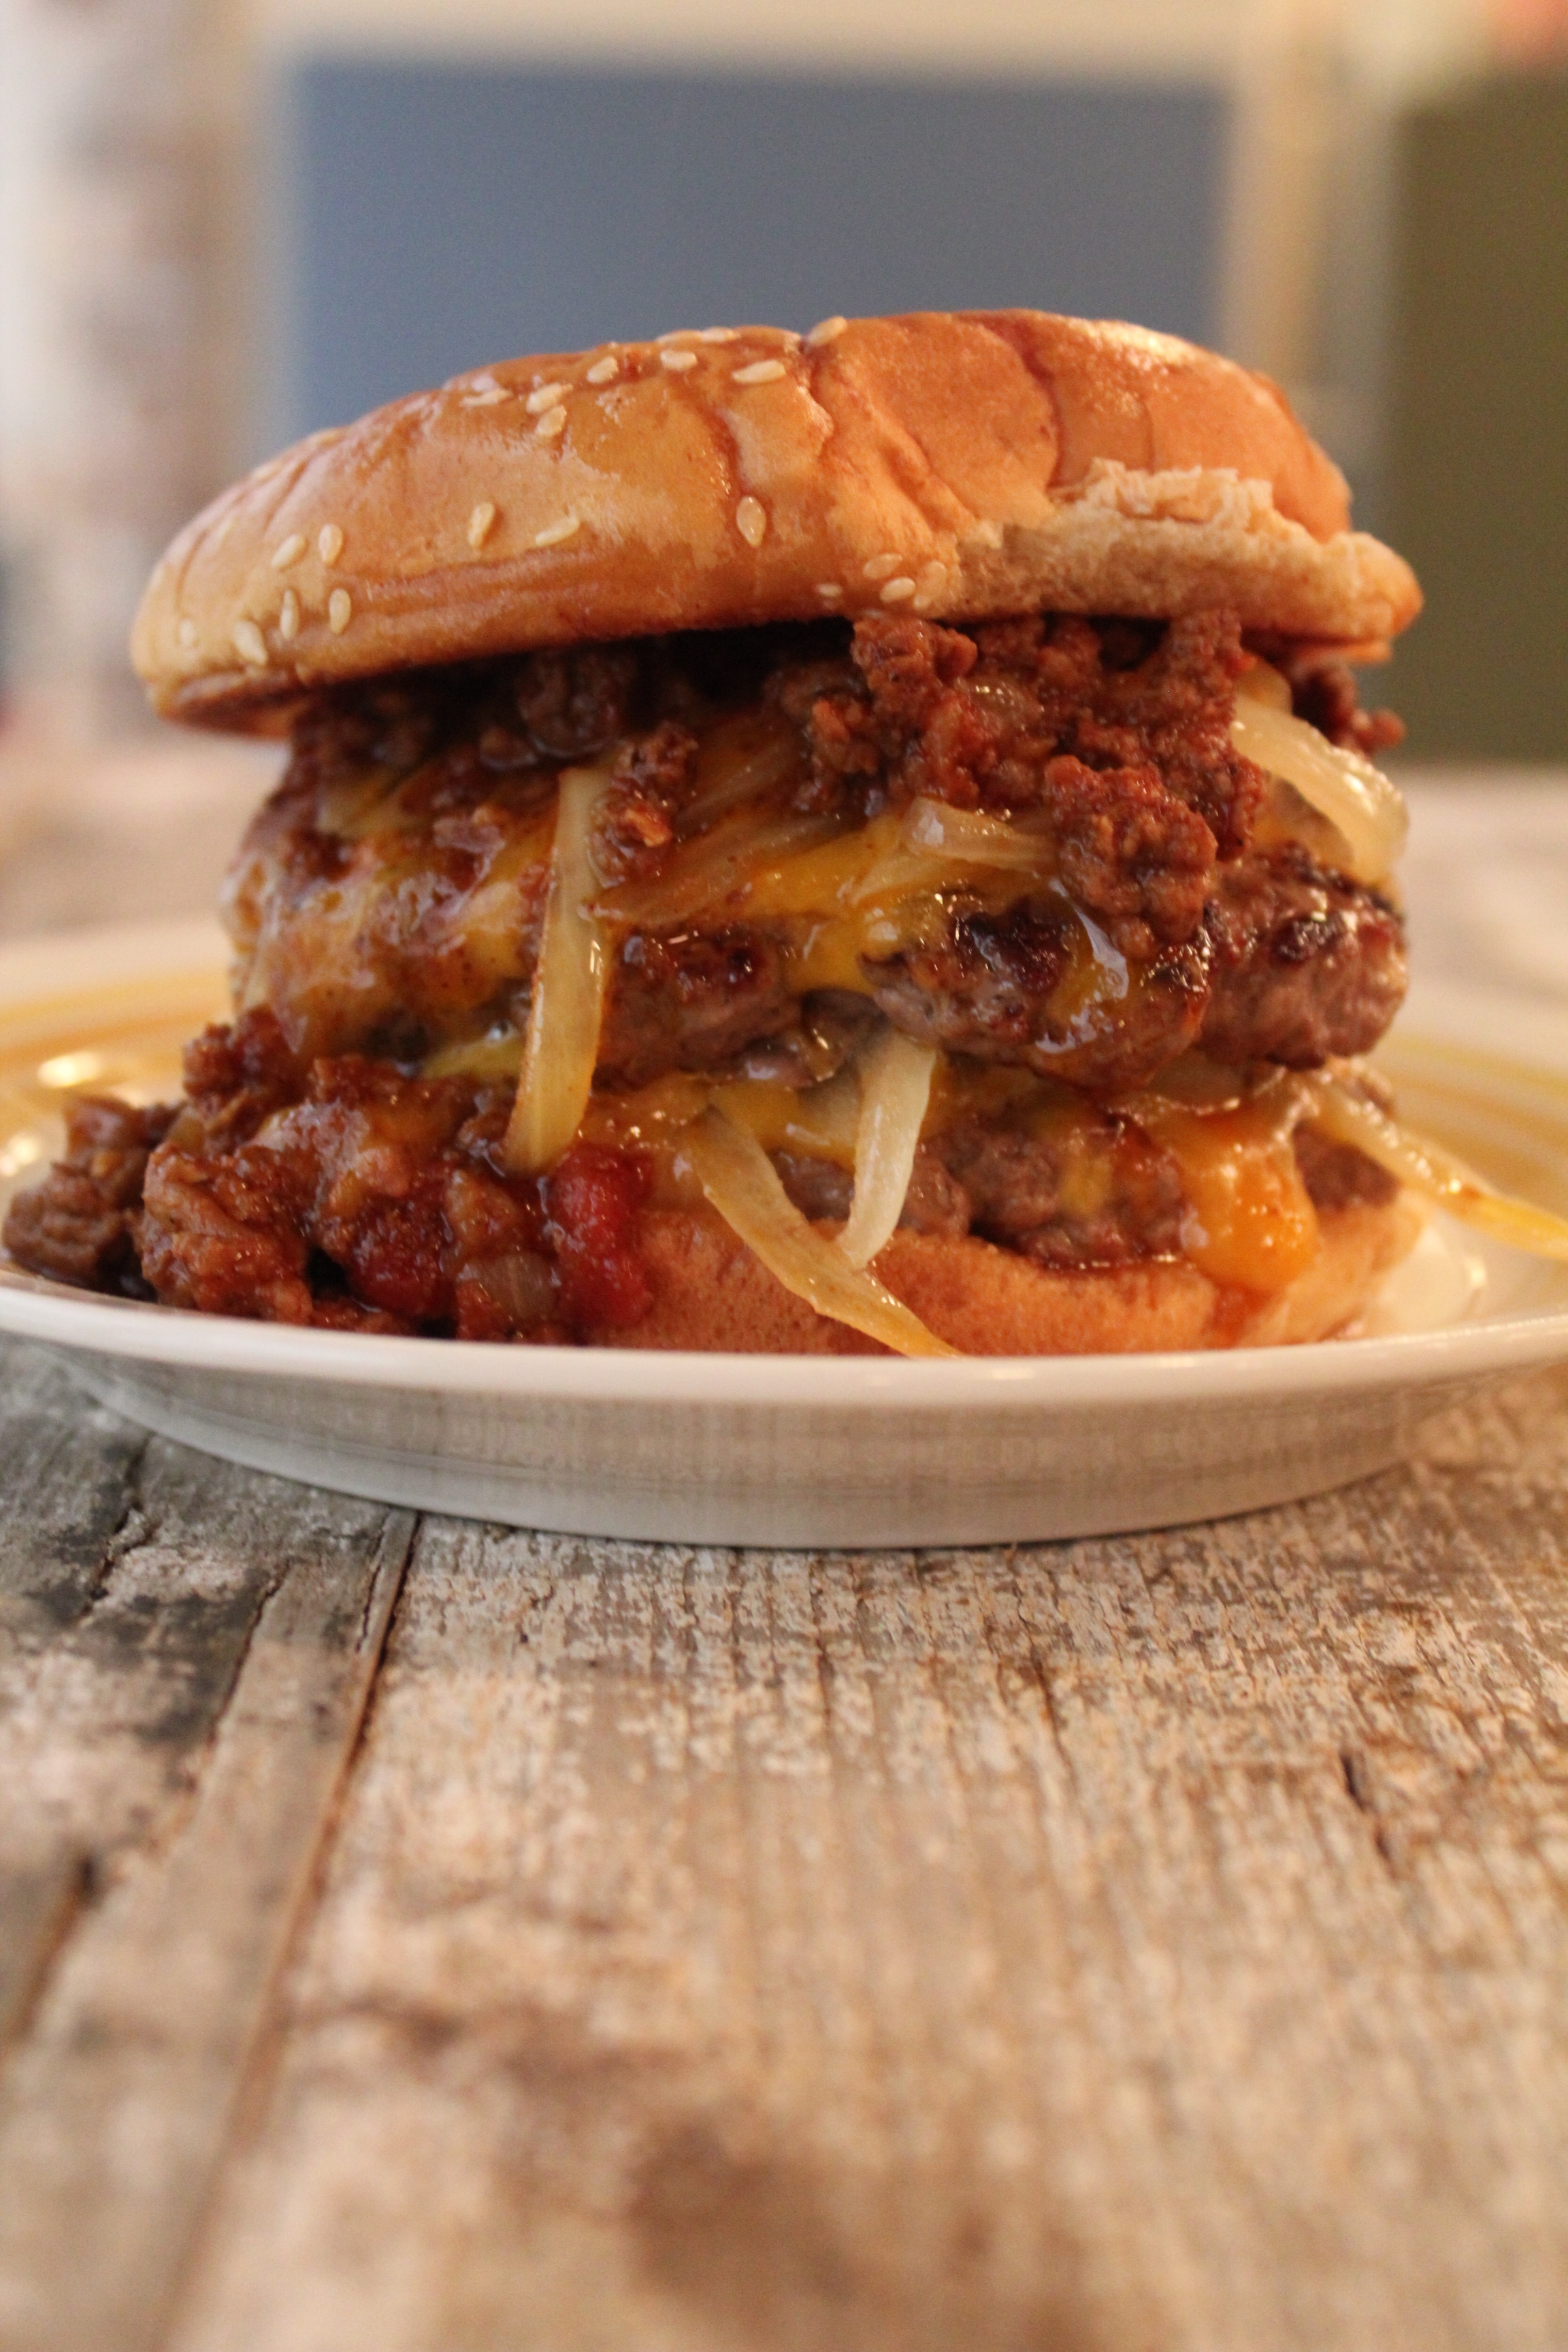 Double Chili Cheeseburger with Griddled Onions